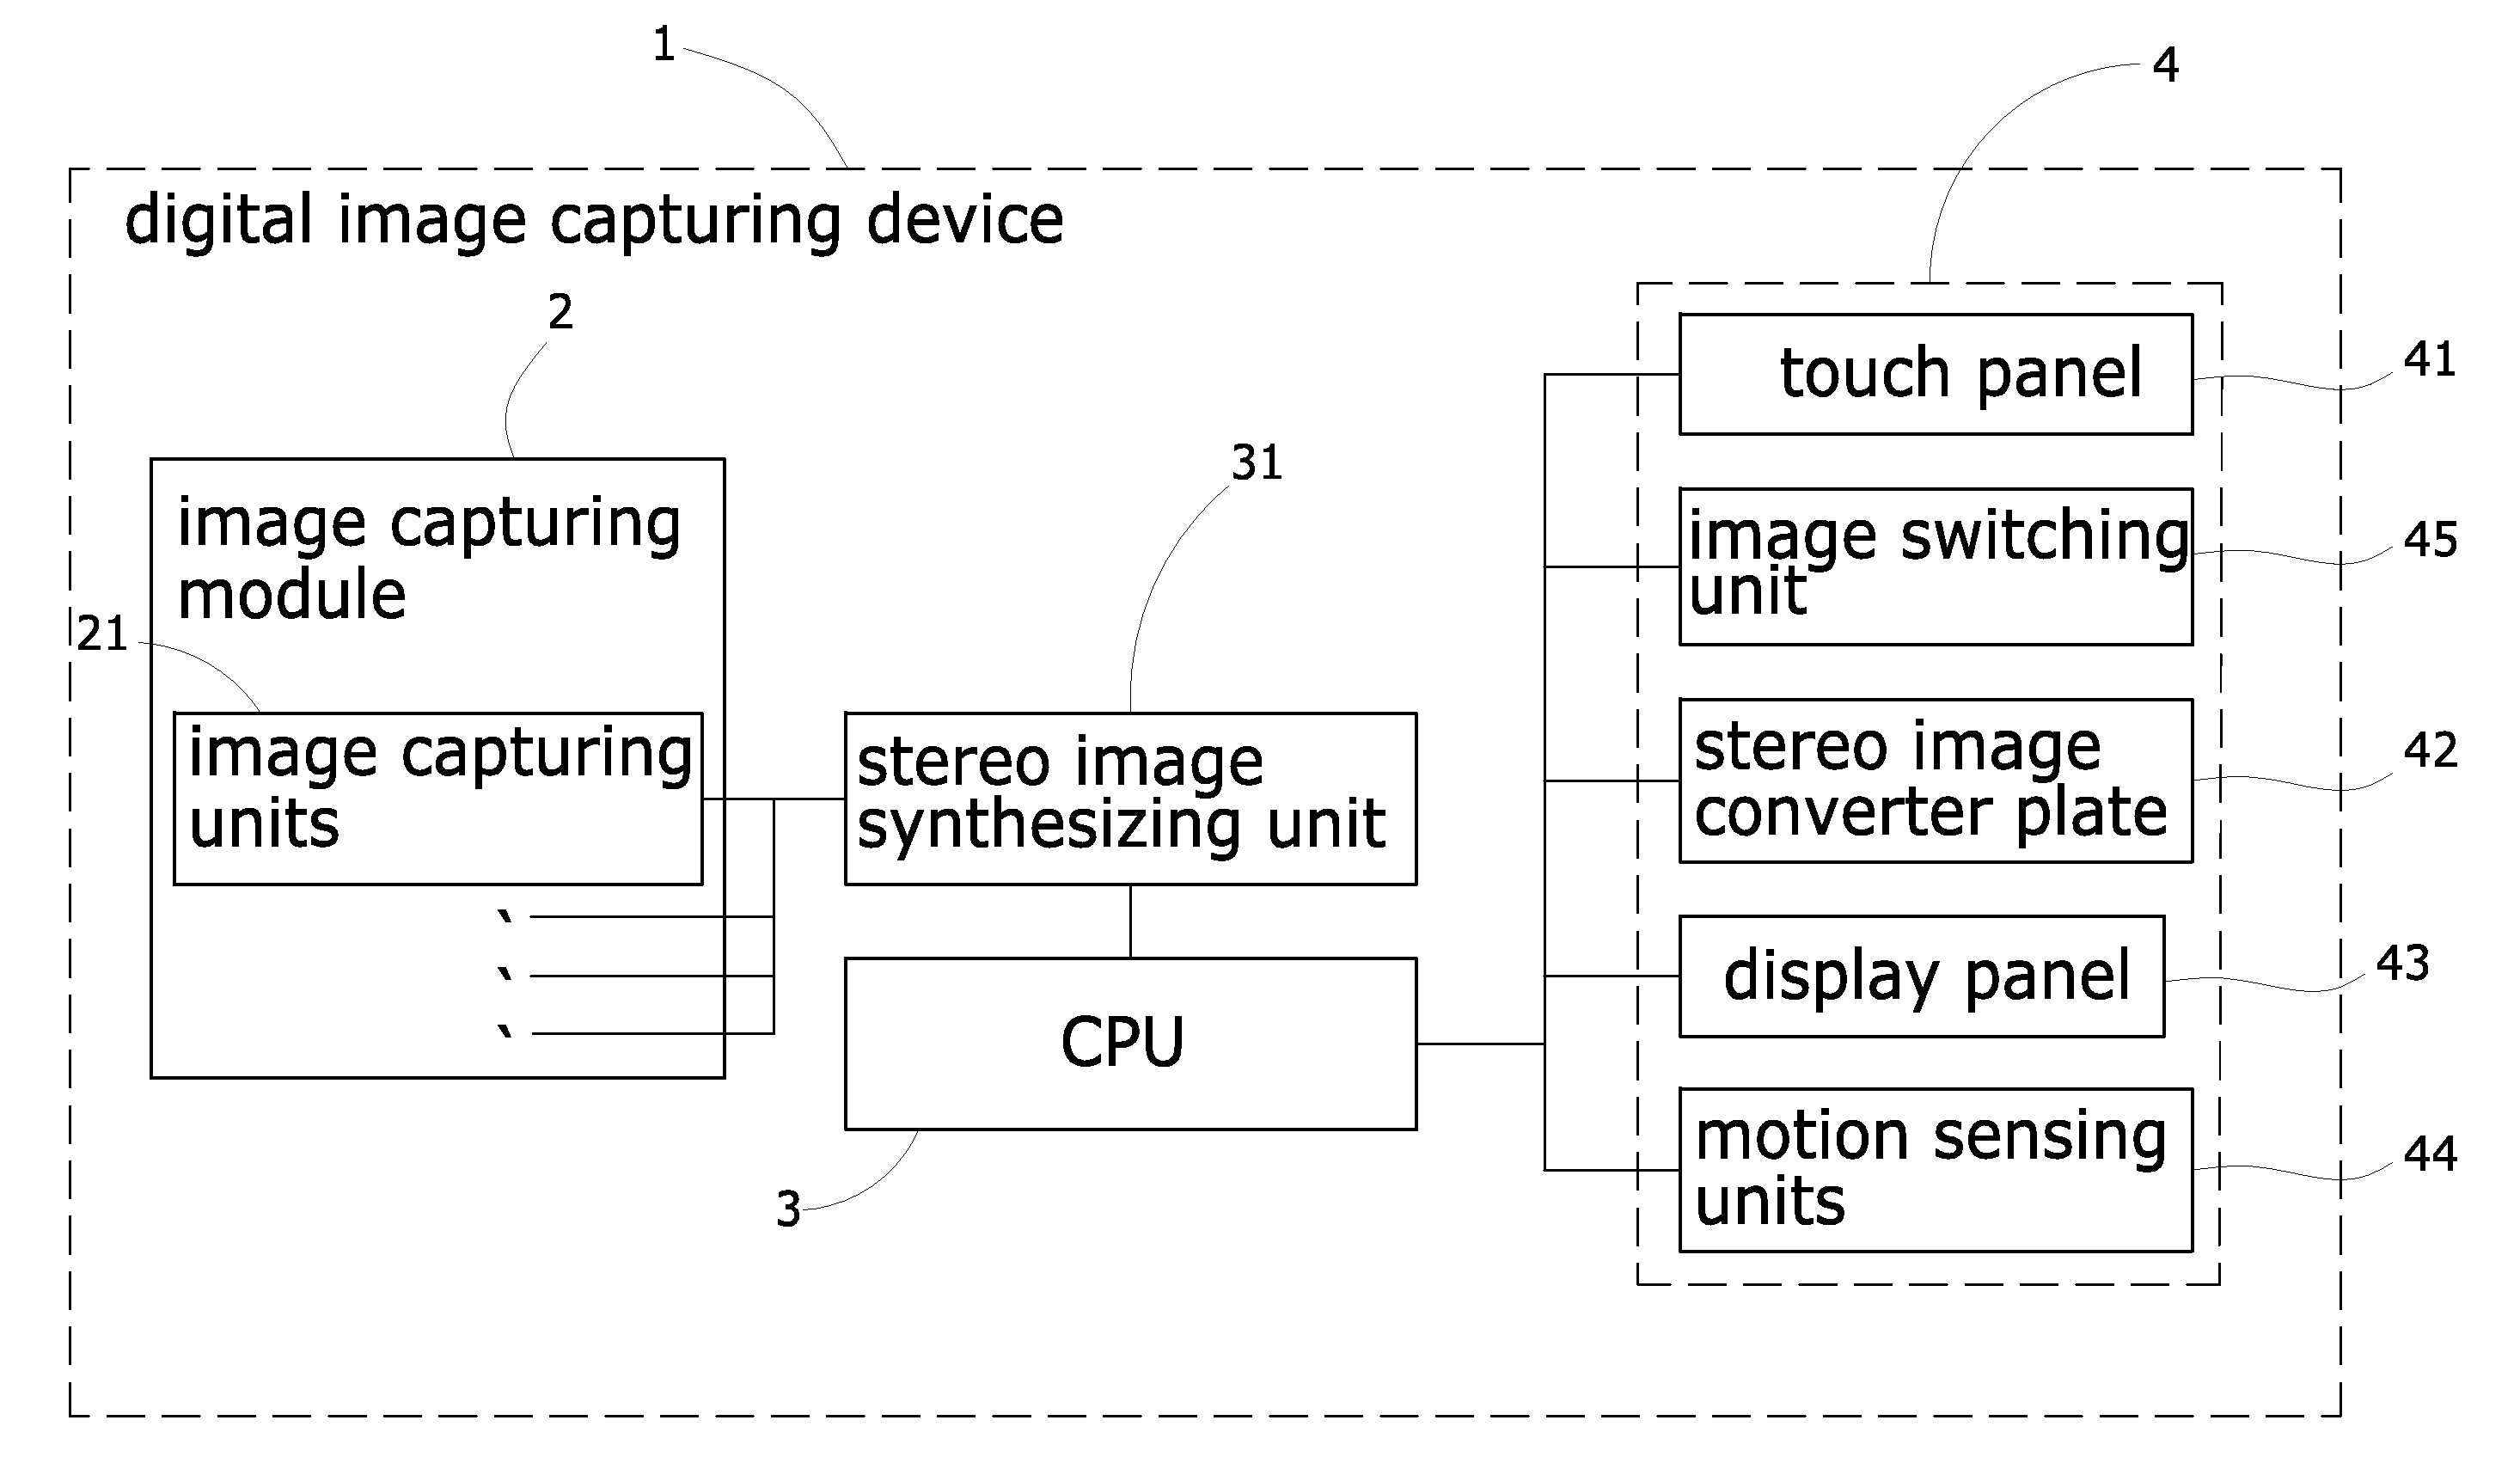 Digital image capturing device with stereo image display and touch functions